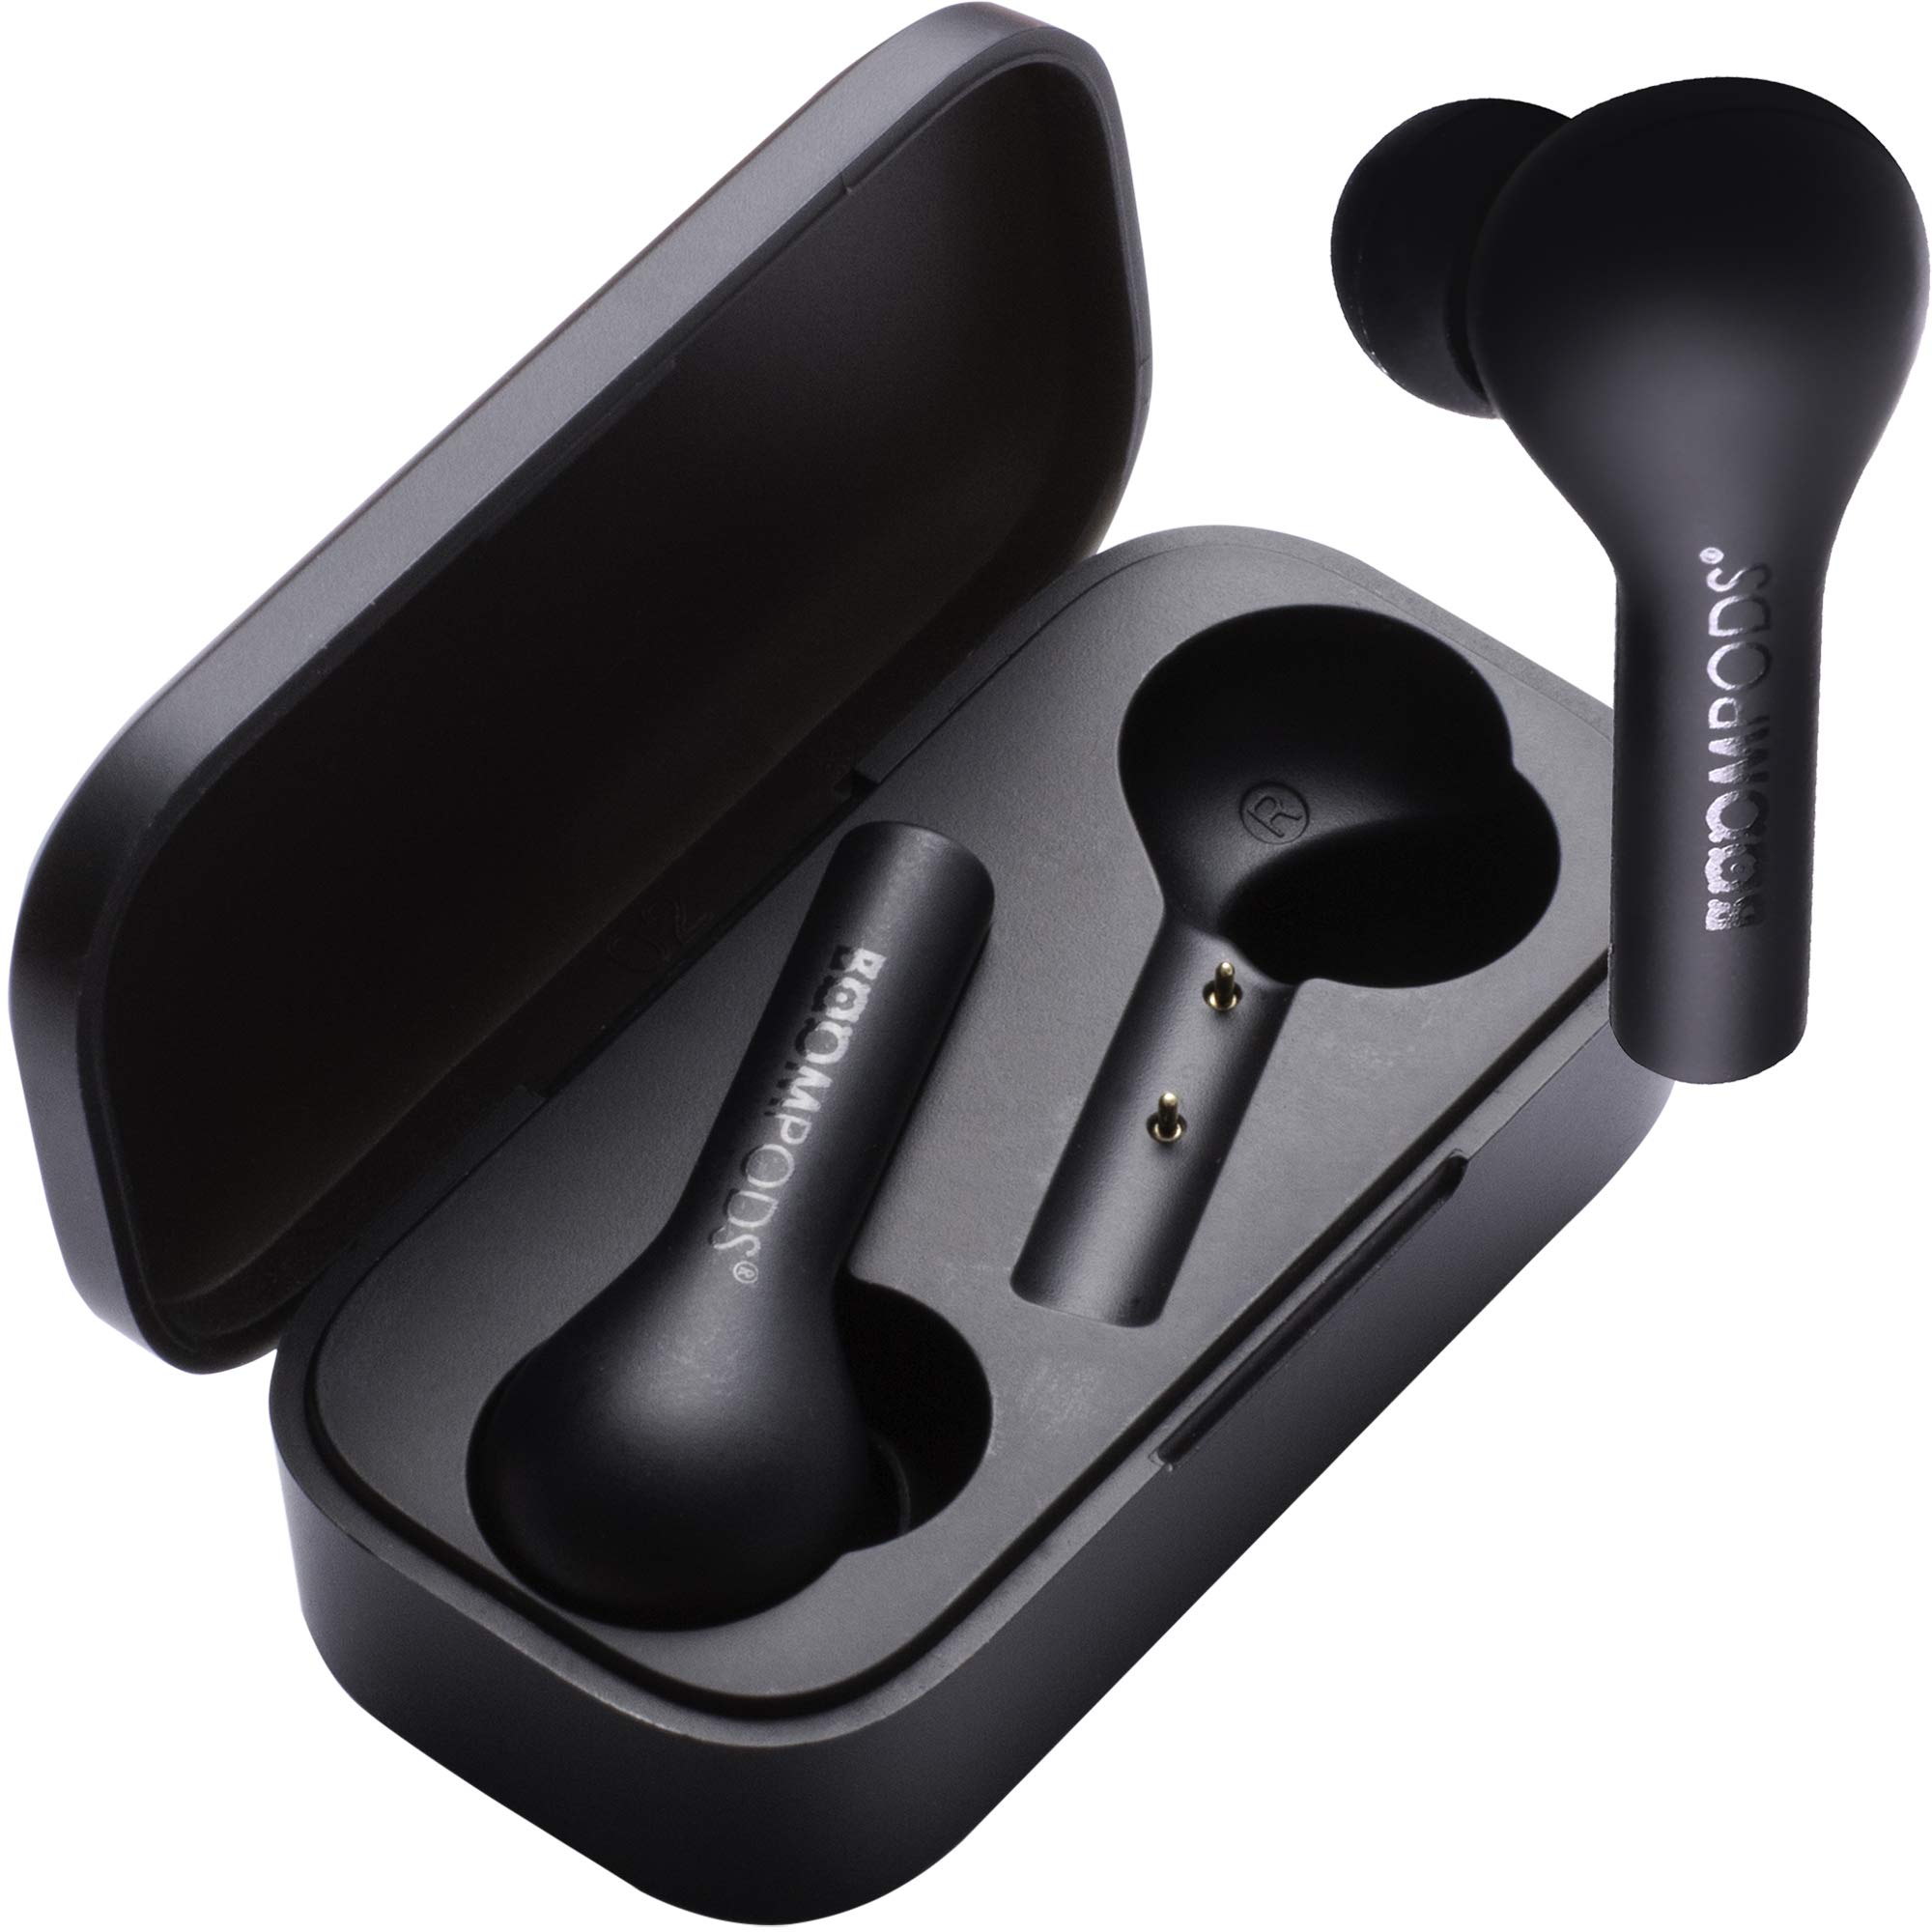 BOOMPODS Bassline True Wireless Earbuds - Bluetooth in-Ear Headphones, Water/Sweat Resistant, Compact Travel Charging Case, Instant Connection, TWS...